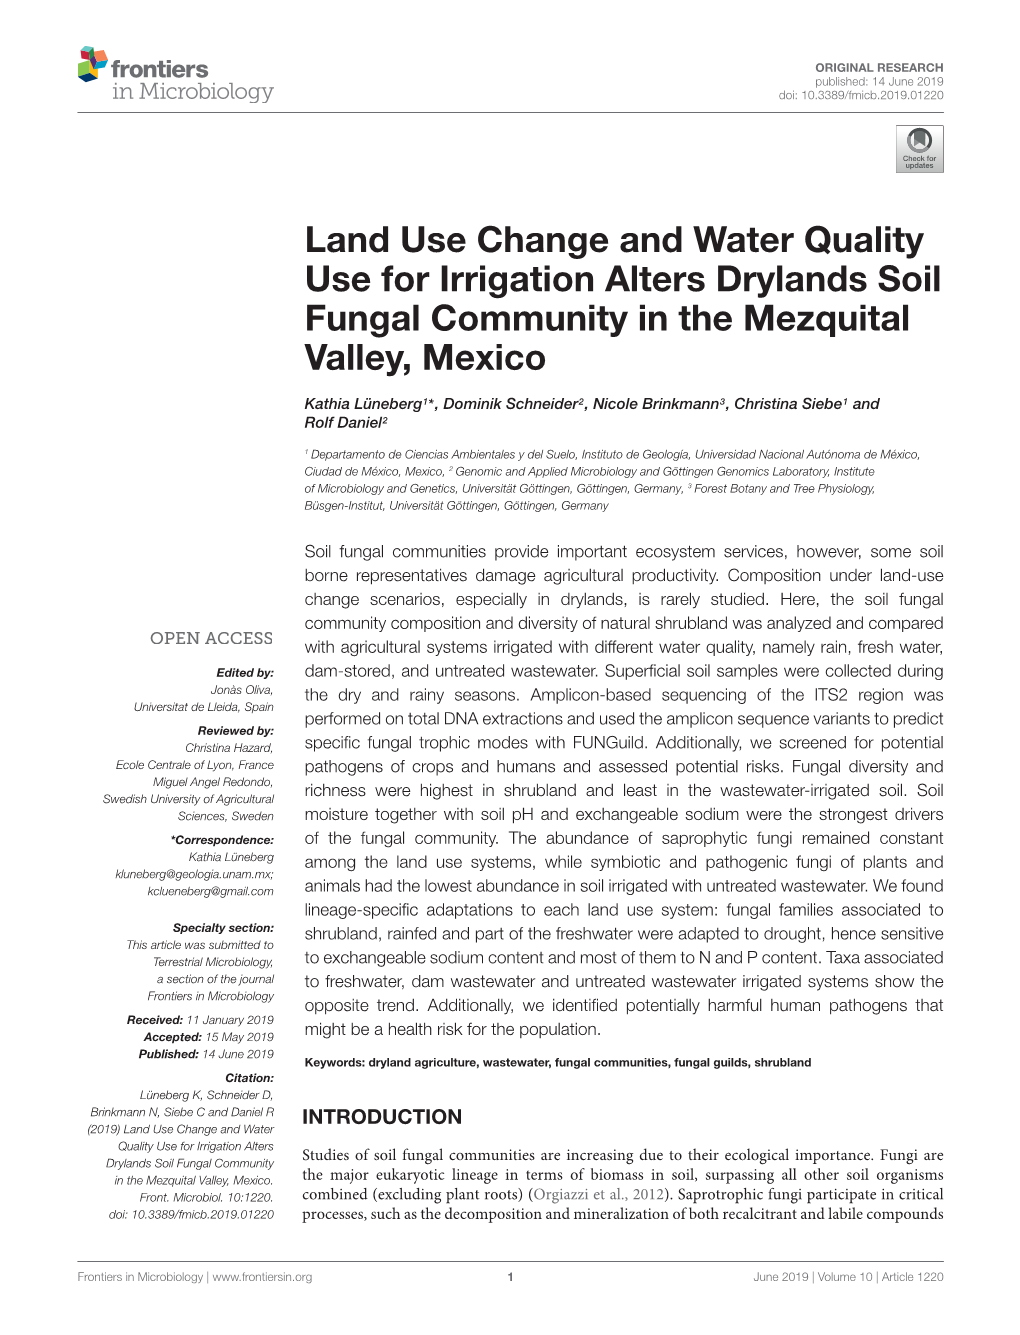 Land Use Change and Water Quality Use for Irrigation Alters Drylands Soil Fungal Community in the Mezquital Valley, Mexico